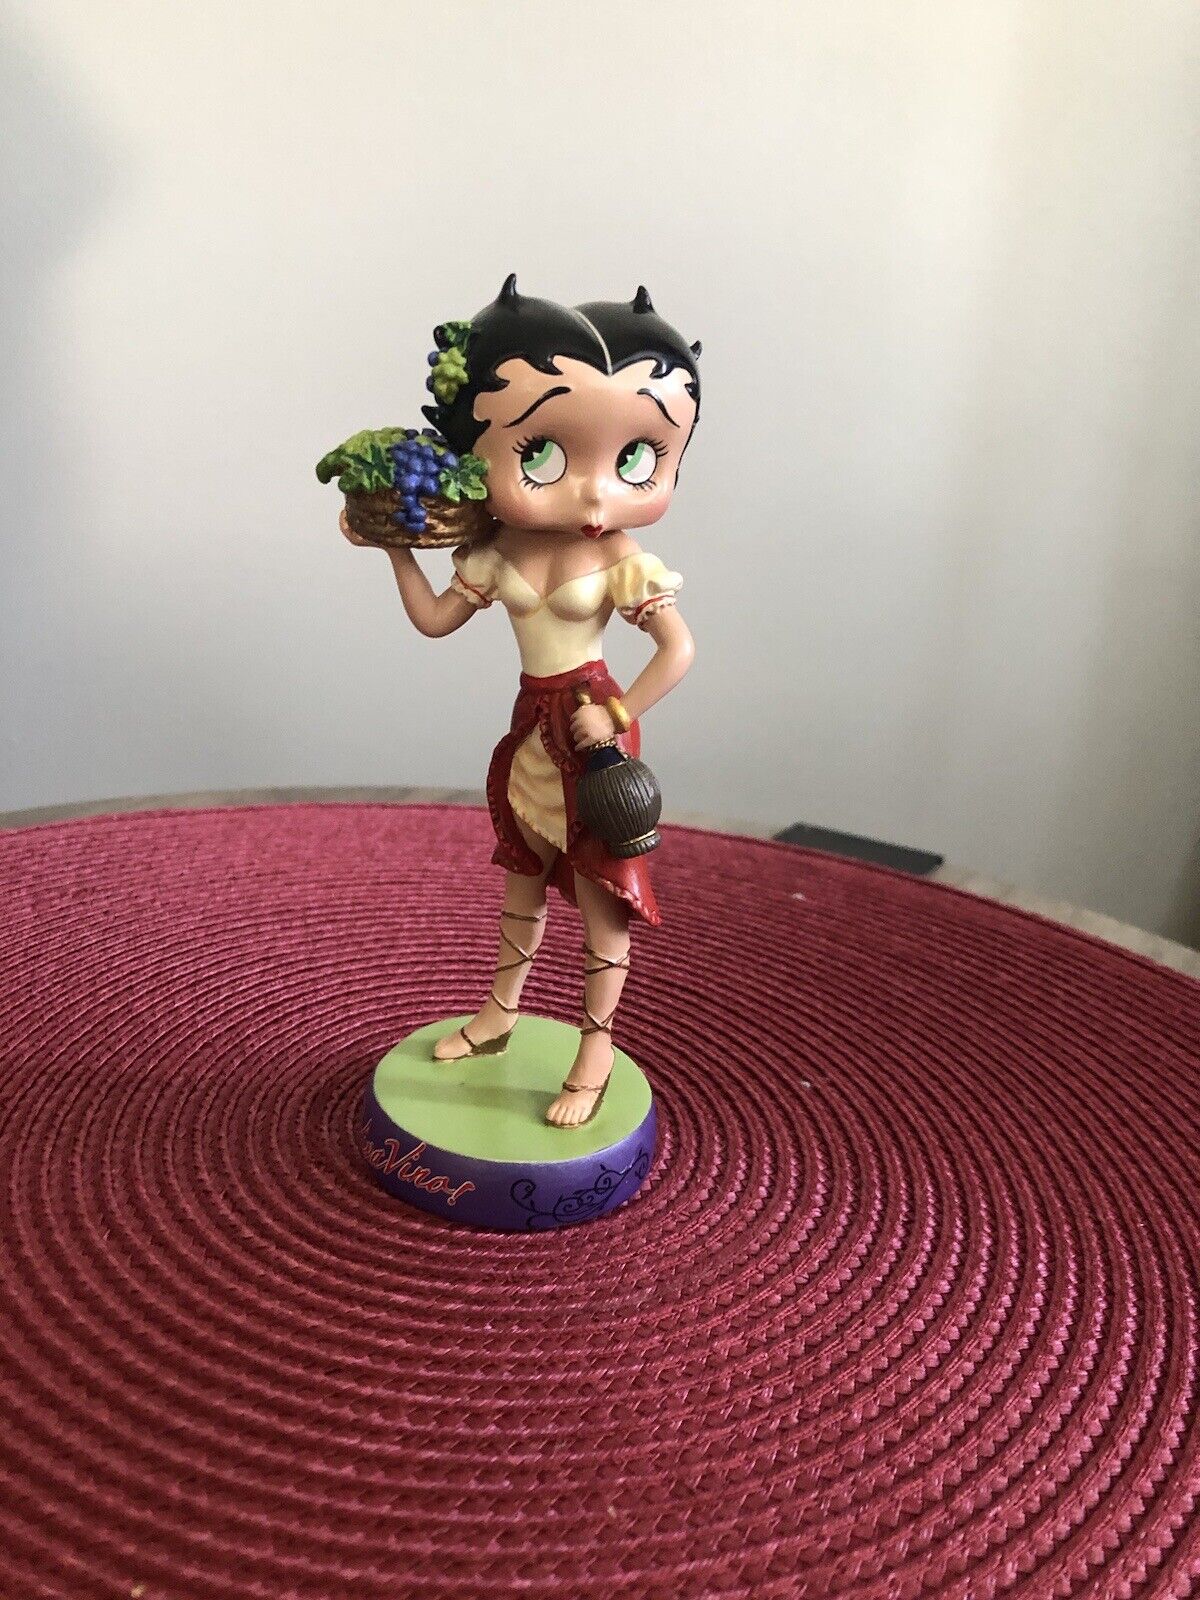 Italy From Betty Boop From Around The World Figurines The Danbury Mint